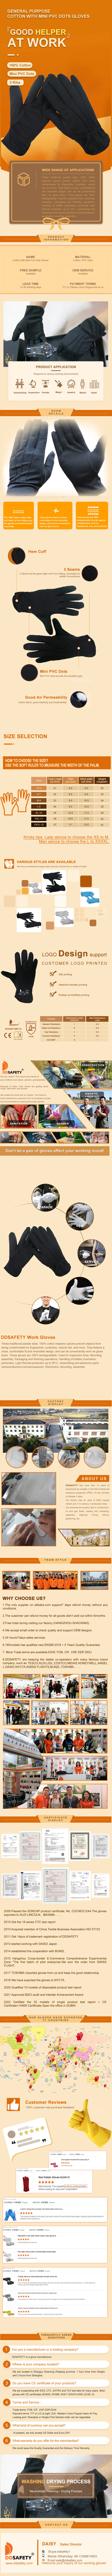 Black Beaded Parade Cotton Gloves with PVC Dots Grip - DCH242 Black Beaded Parade Cotton Gloves with PVC Dots Grip - DCH242 gloves,cotton gloves,Black Cotton Gloves